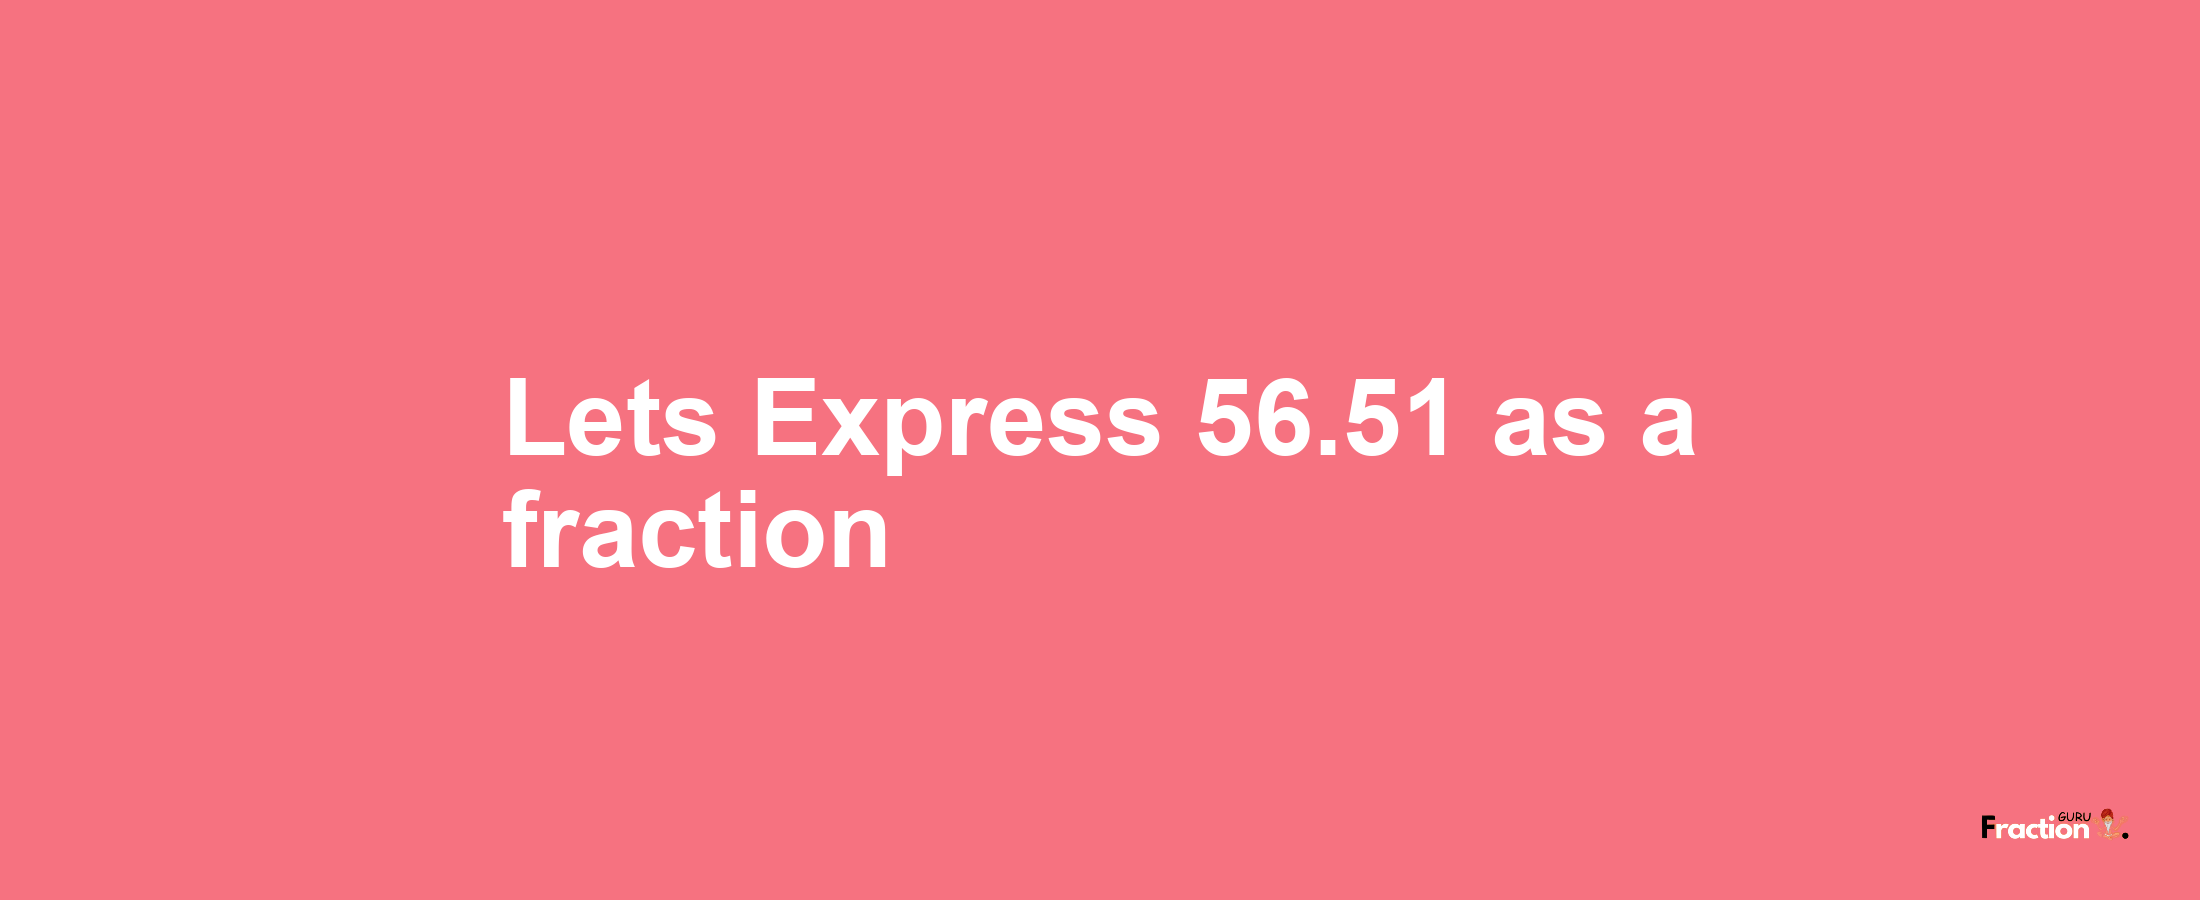 Lets Express 56.51 as afraction